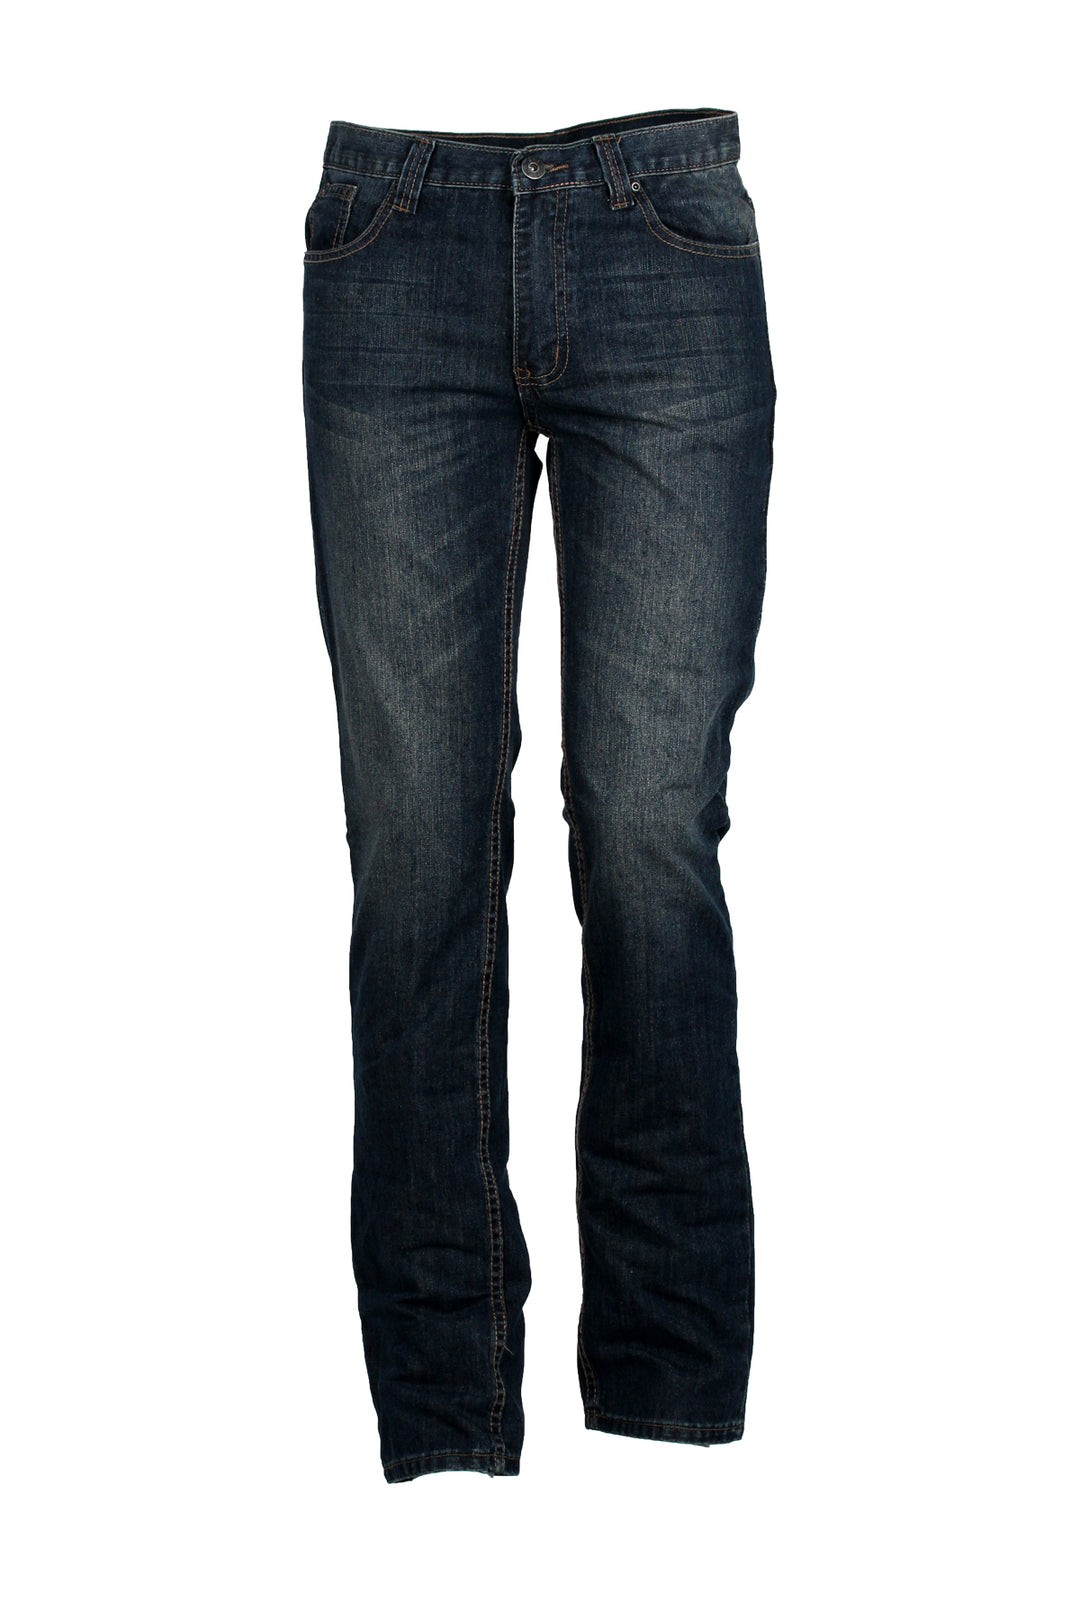 Jeans regual fit uomo